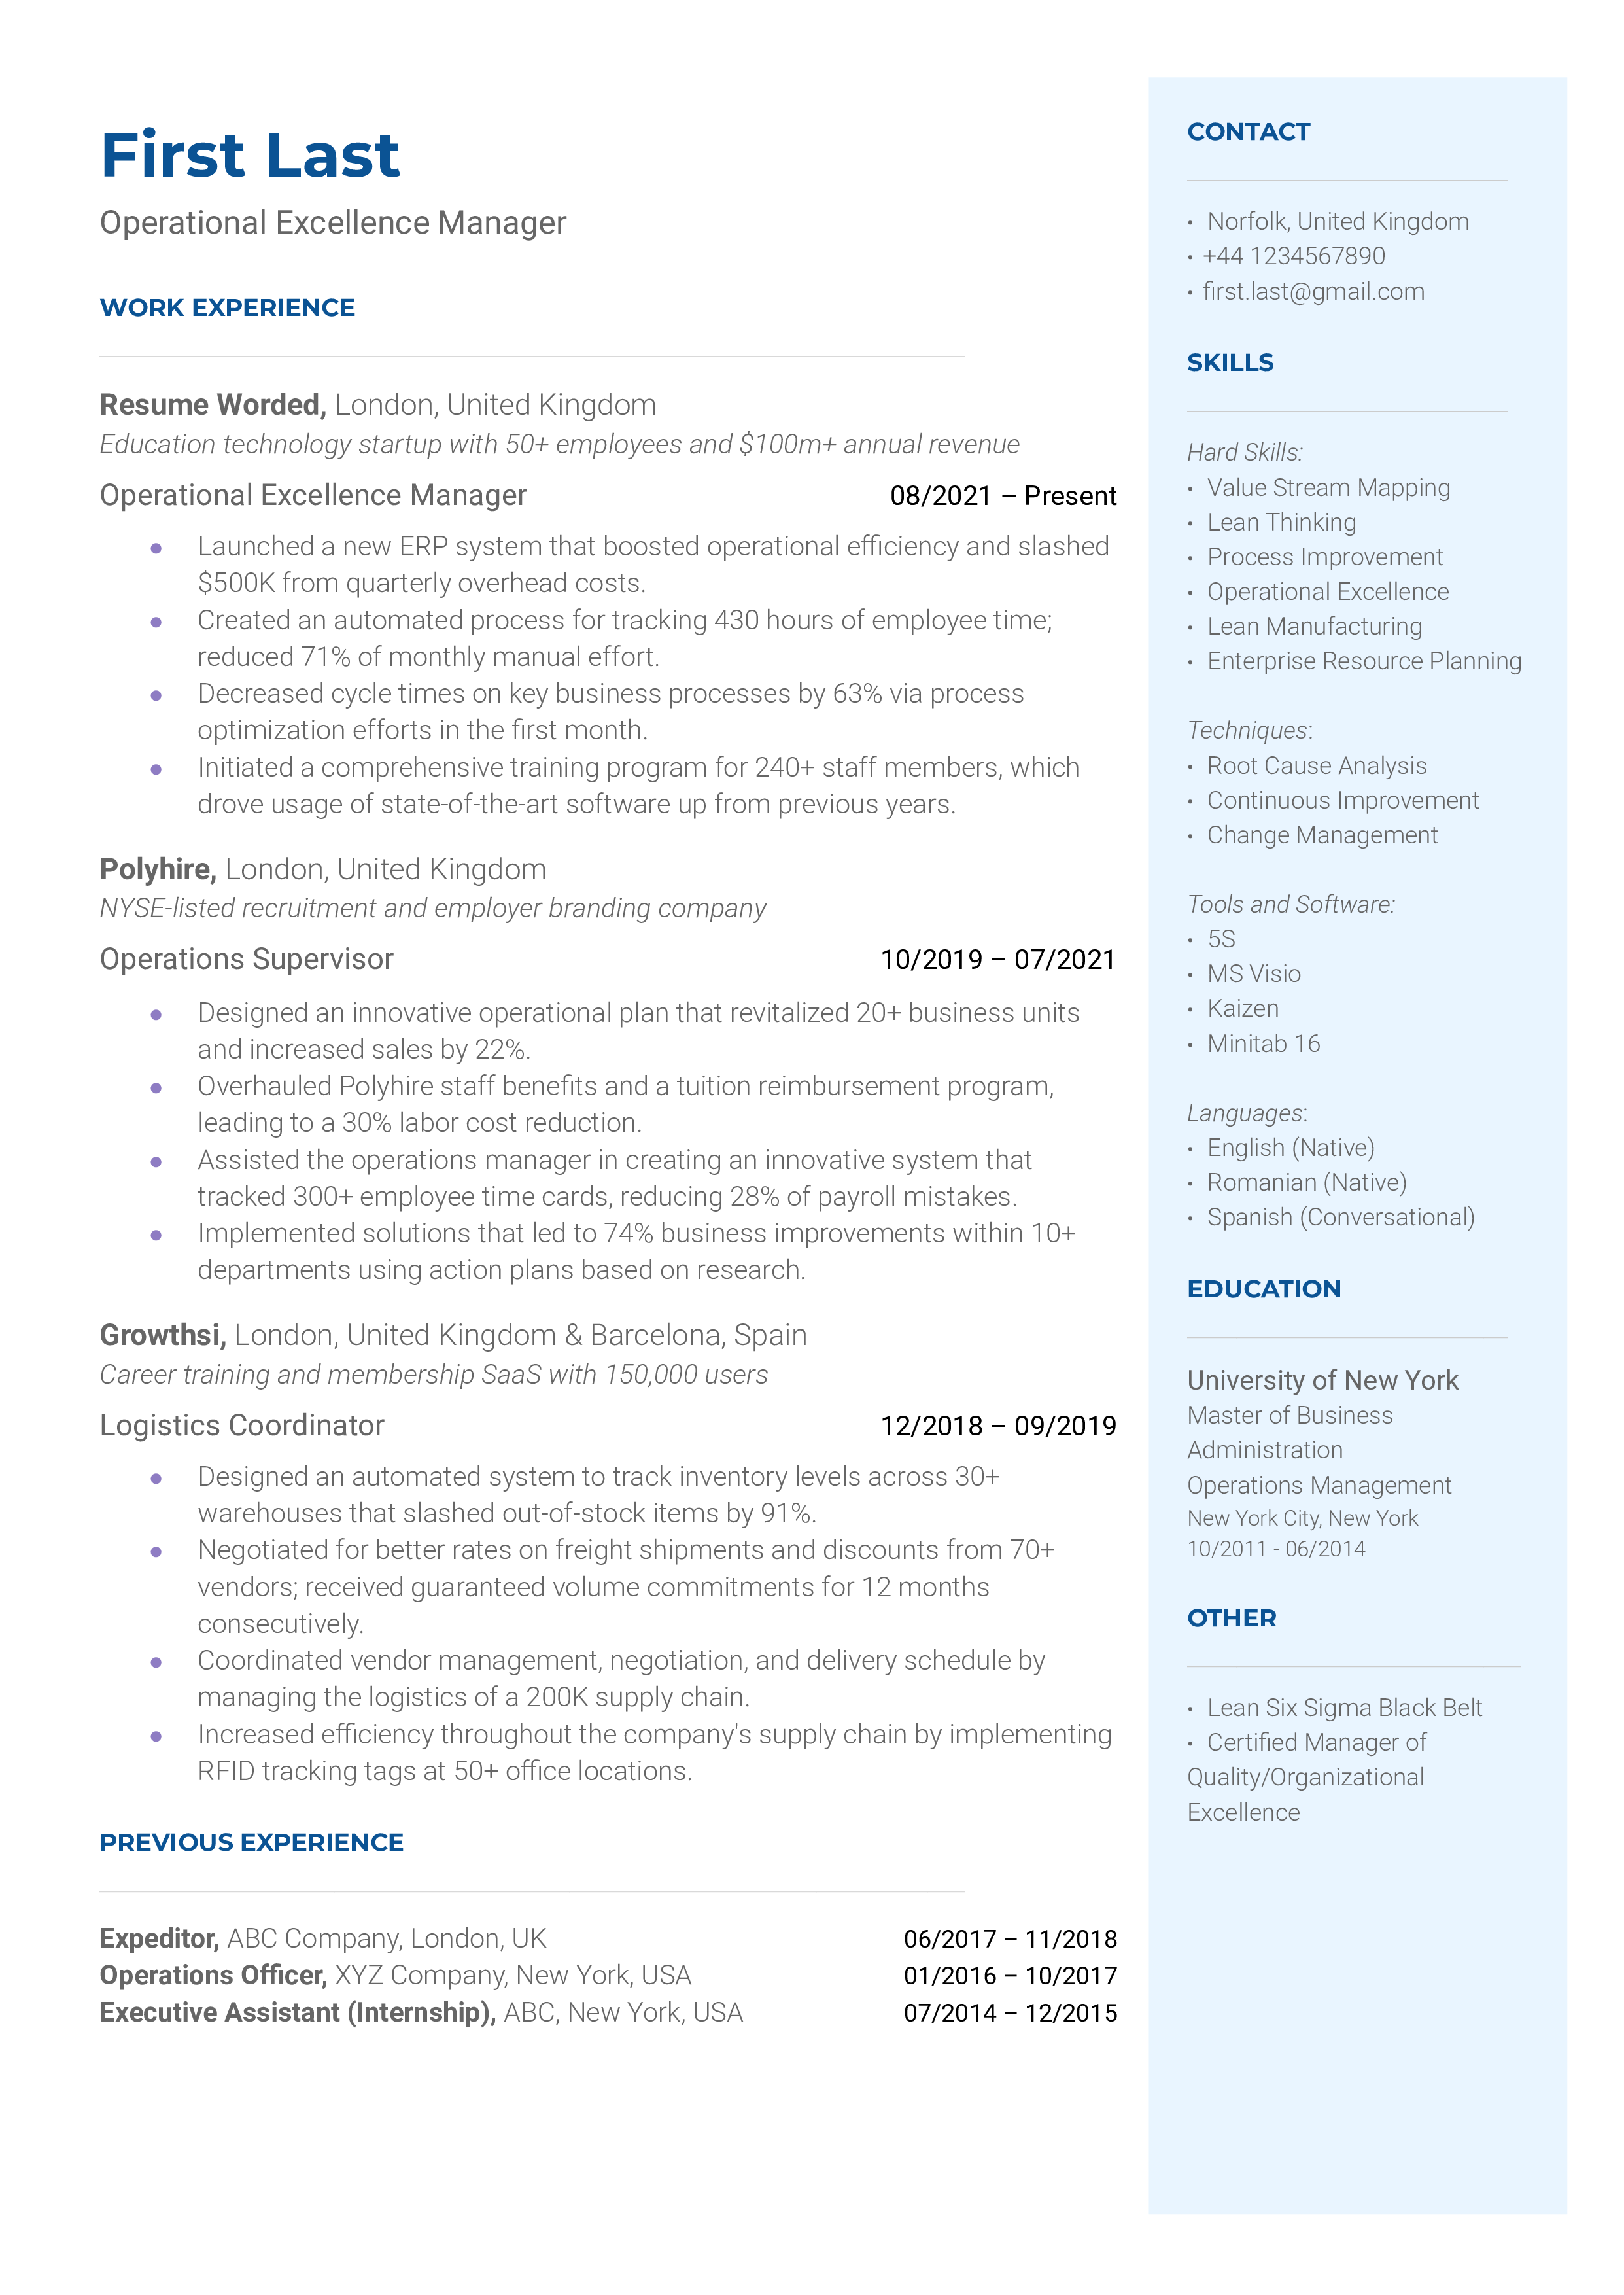 Operational Excellence Manager Resume Sample